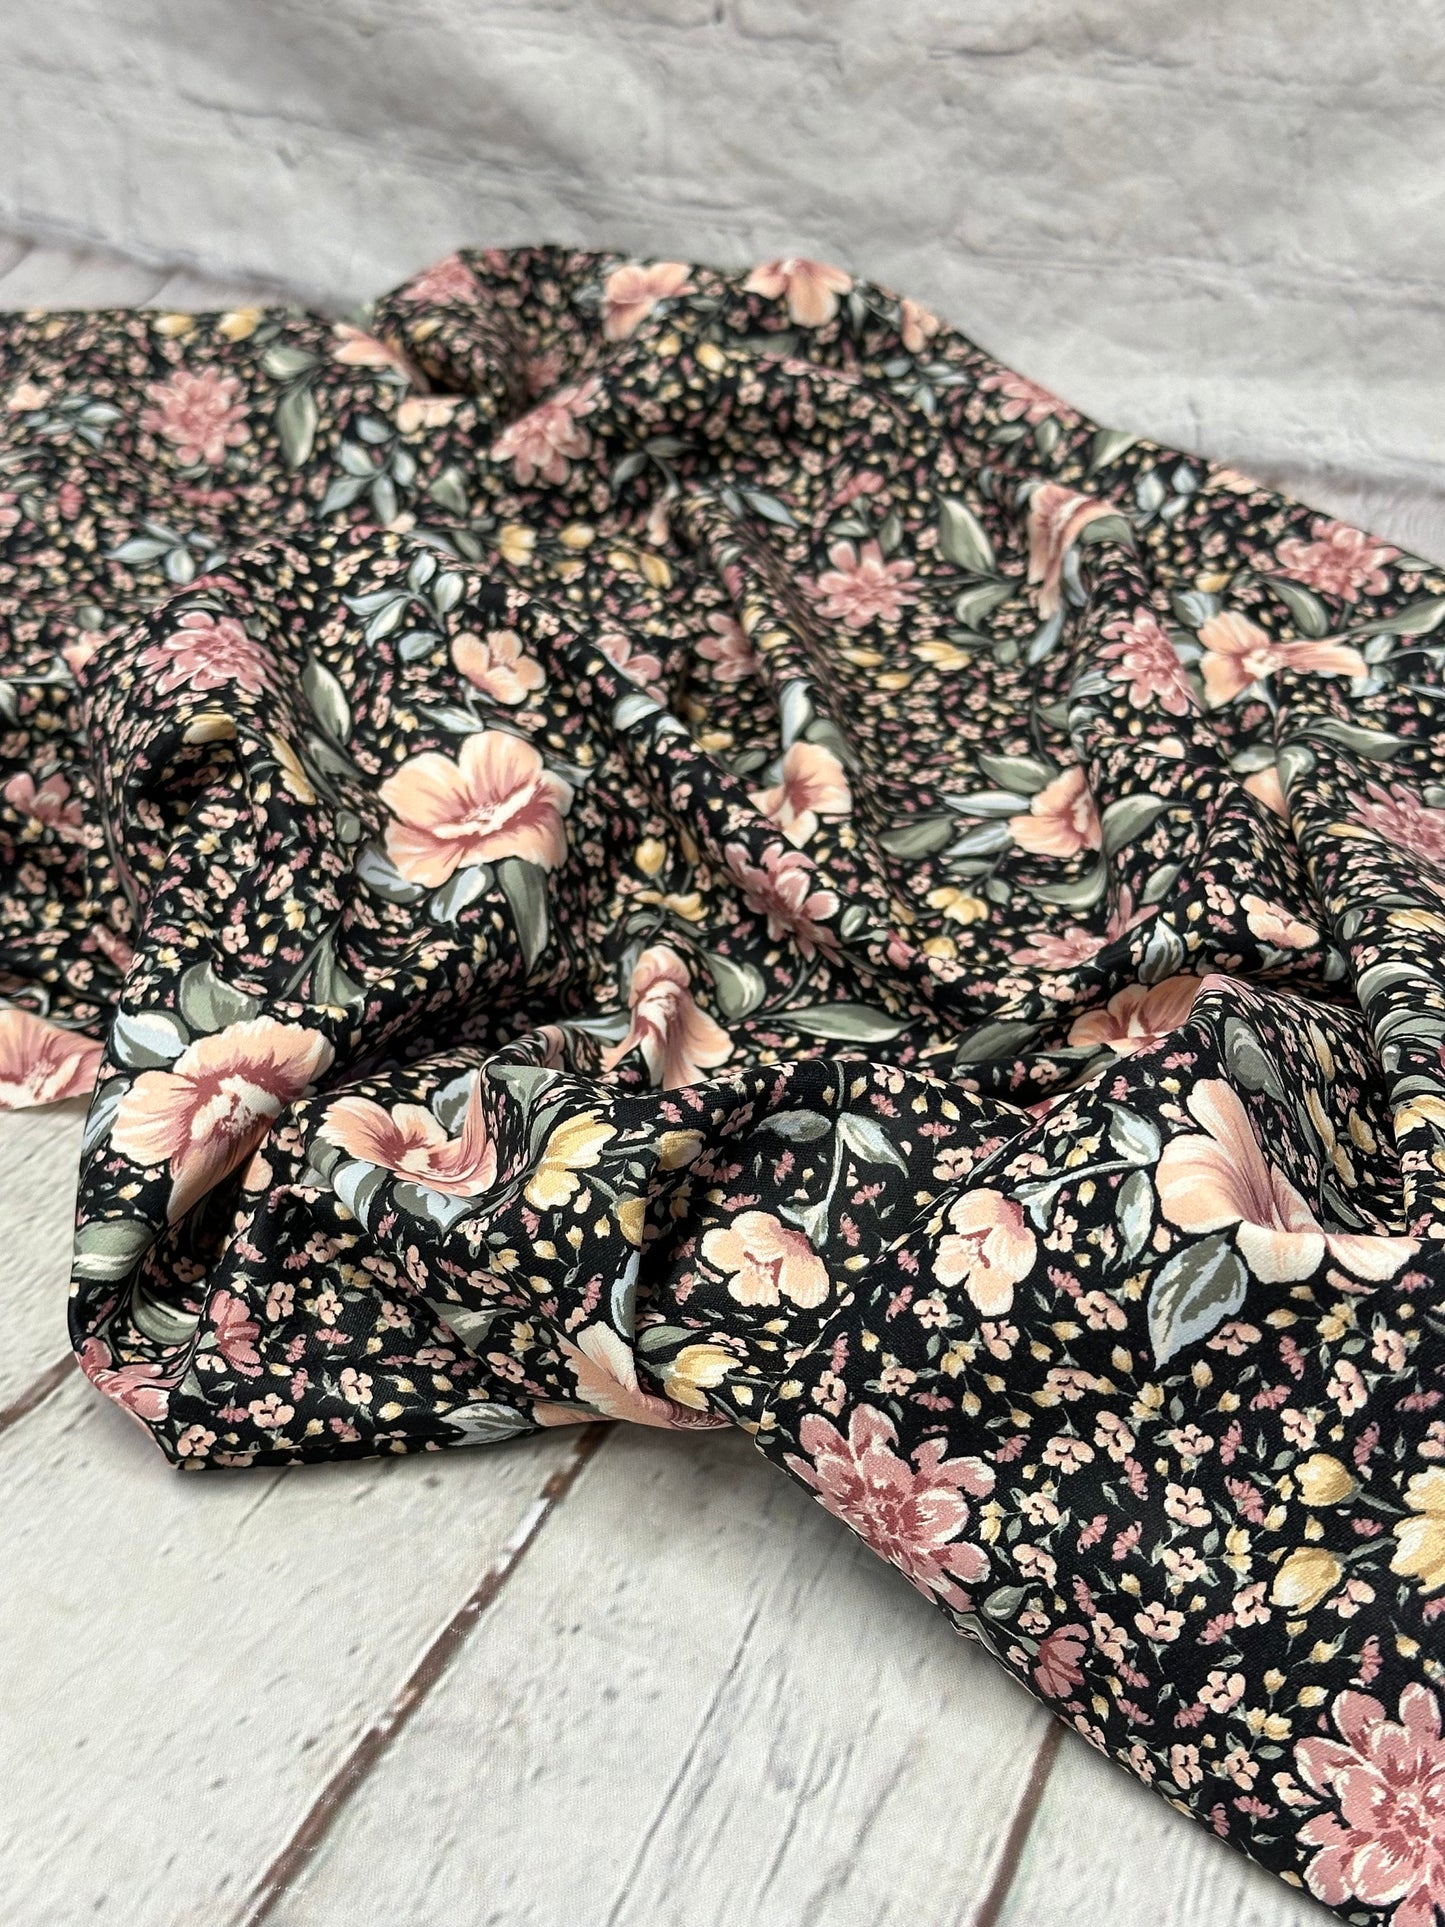 Airflow Woven Print Fabric By The Yard Big and Small Multi Color Summer  Floral Print Black